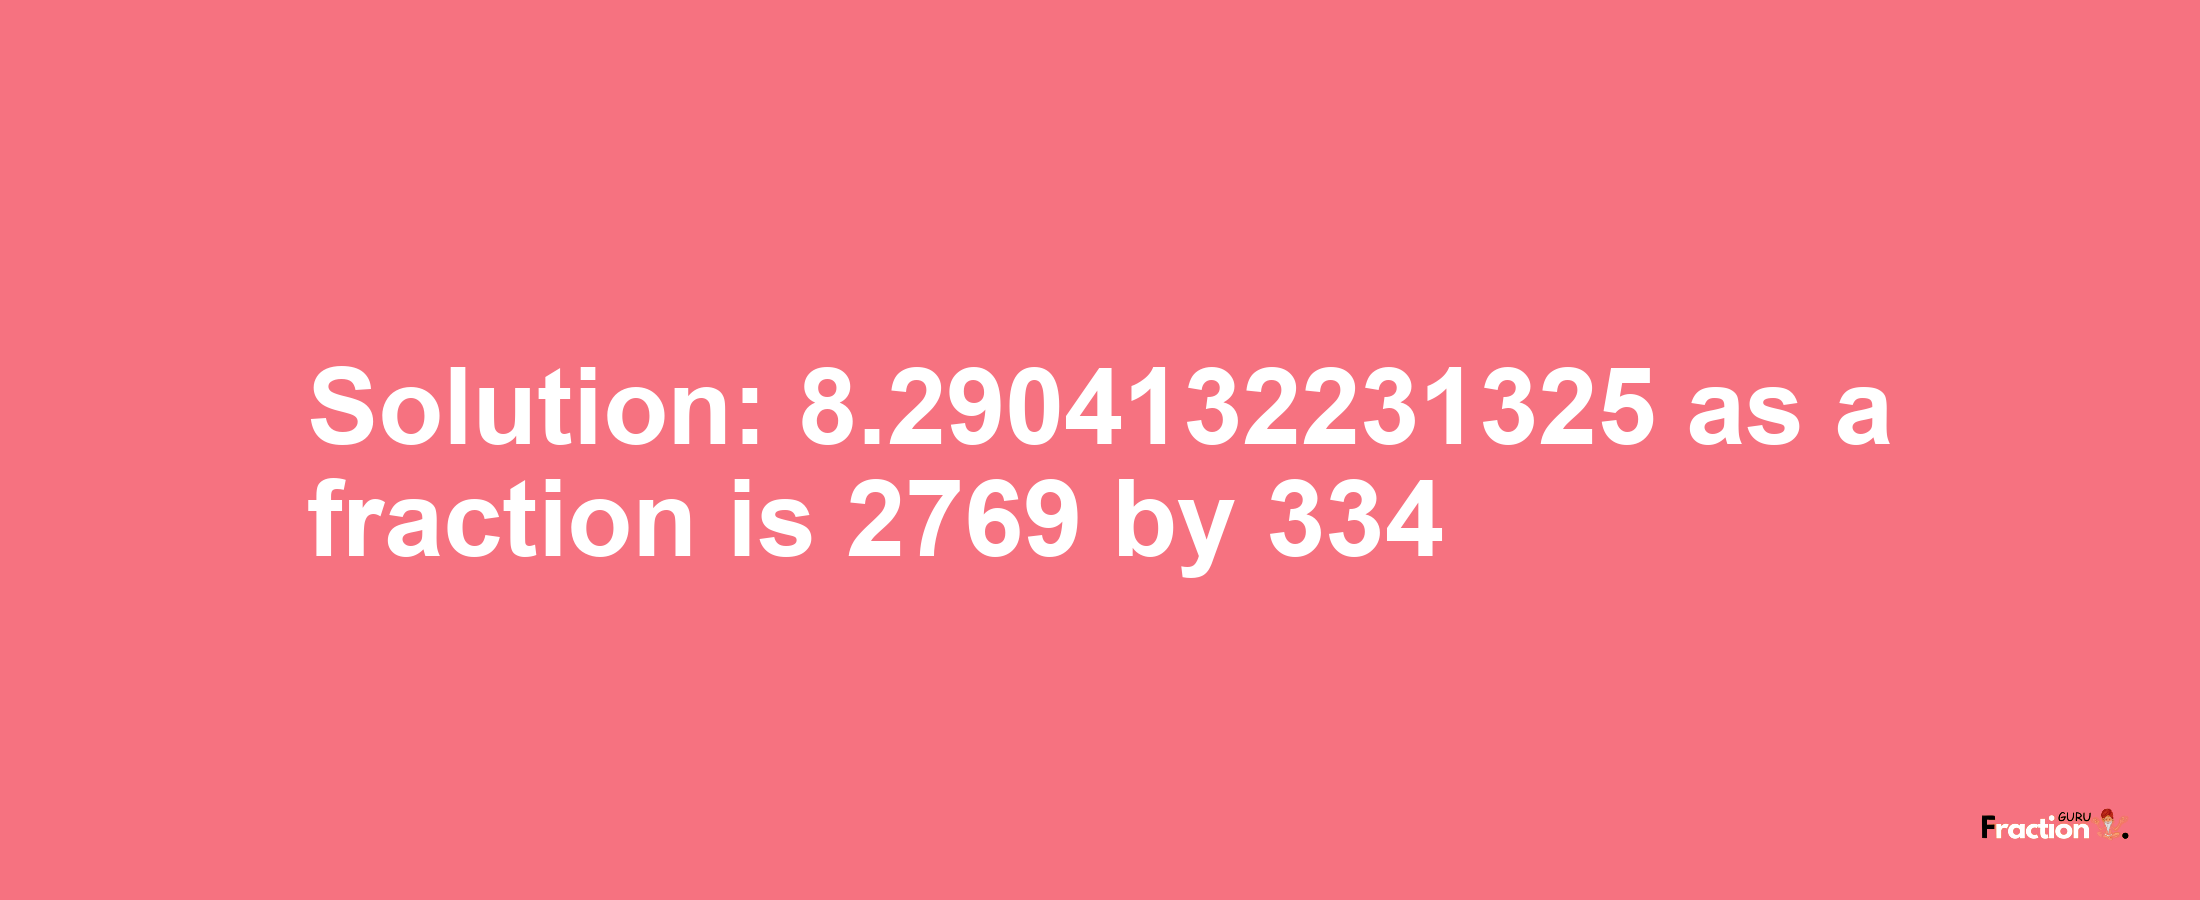 Solution:8.2904132231325 as a fraction is 2769/334